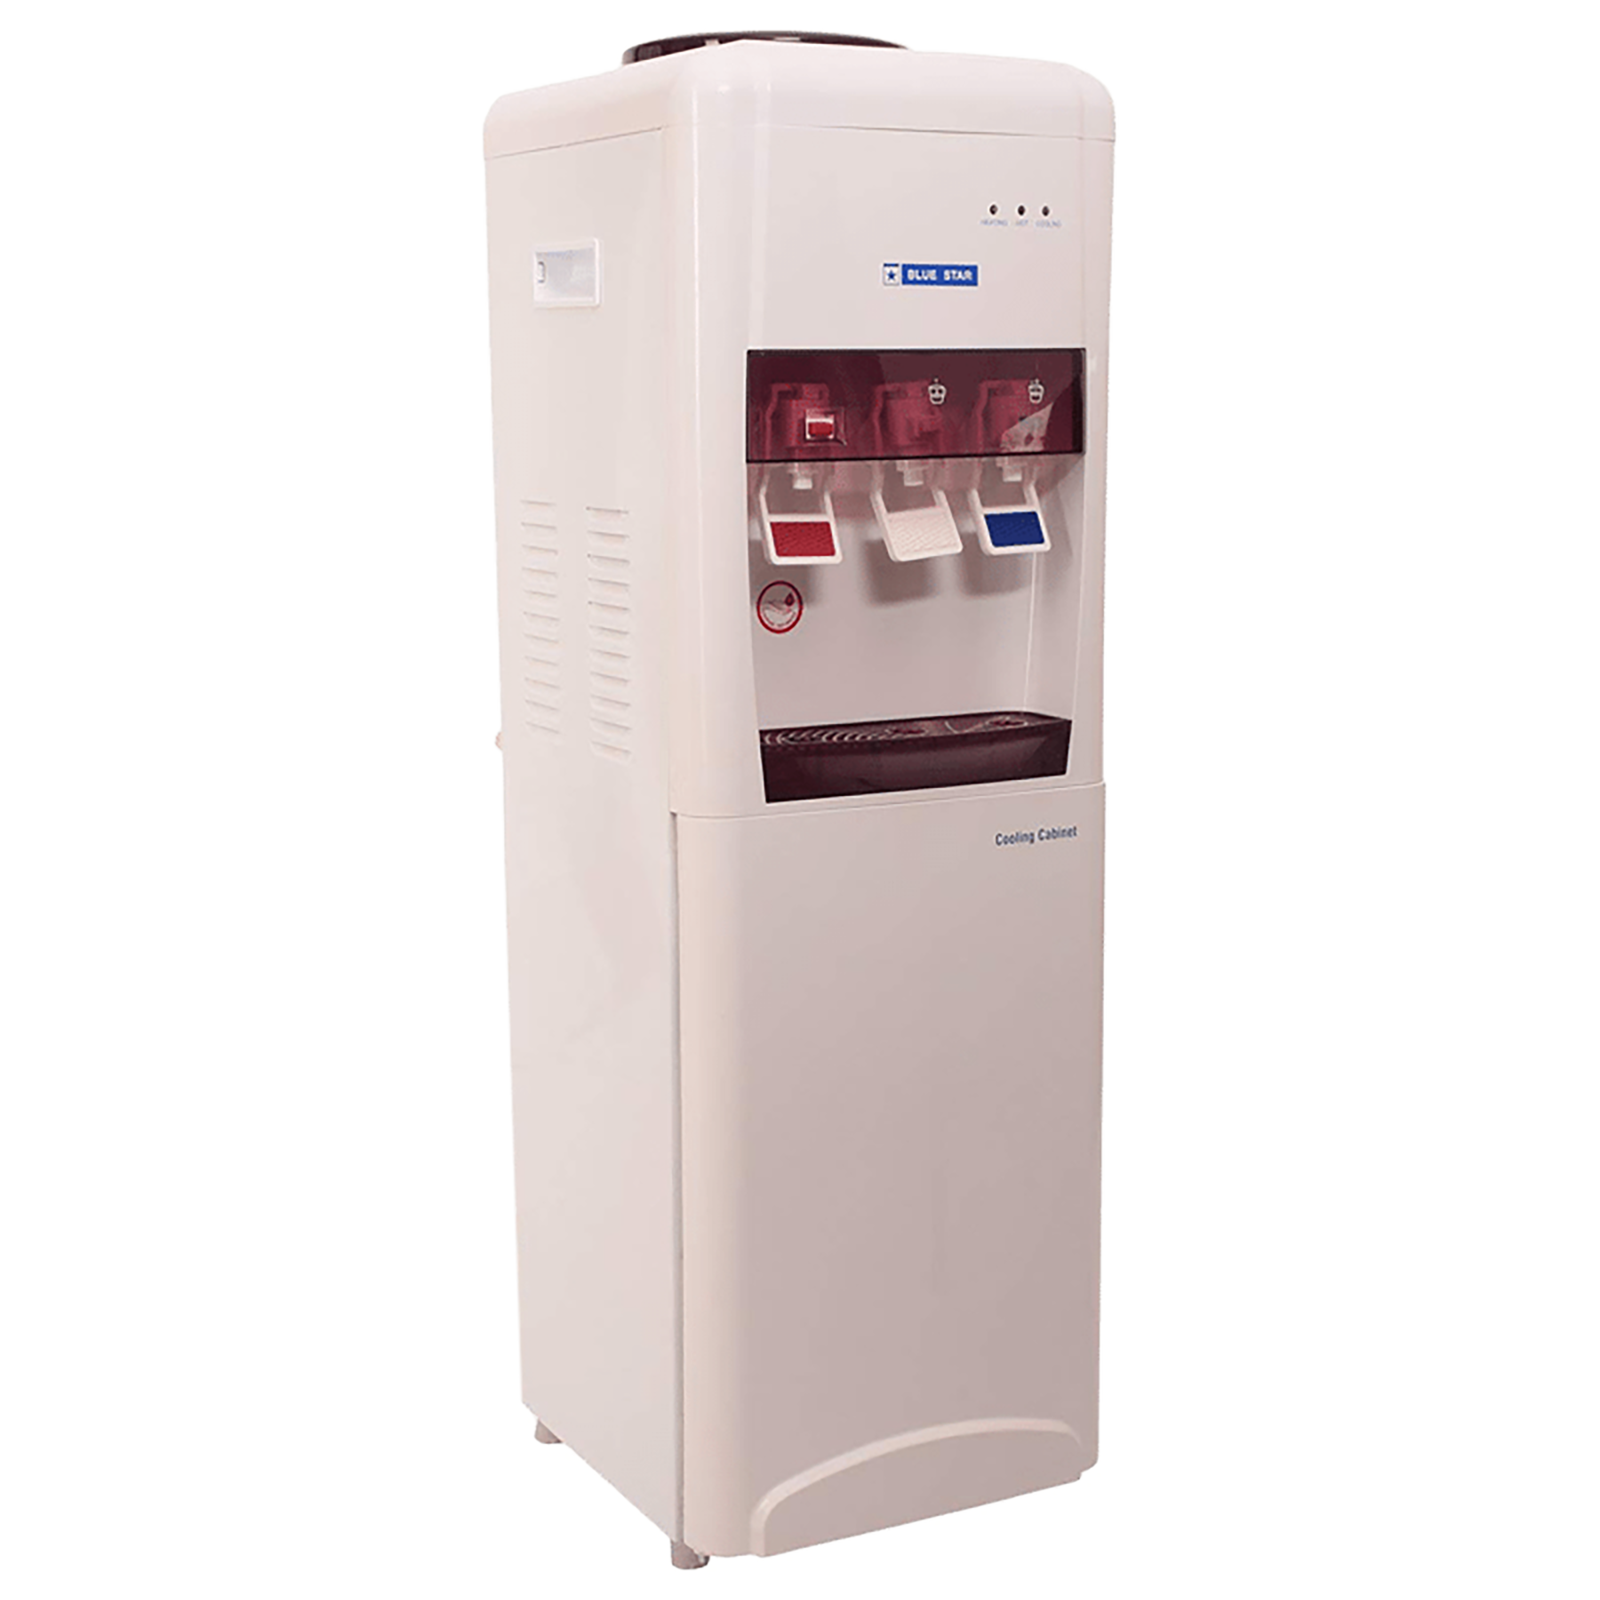 Blue Star H Series Hot, Cold & Normal Top Load Water Dispenser with Cooling Cabinet (White/Coffee)